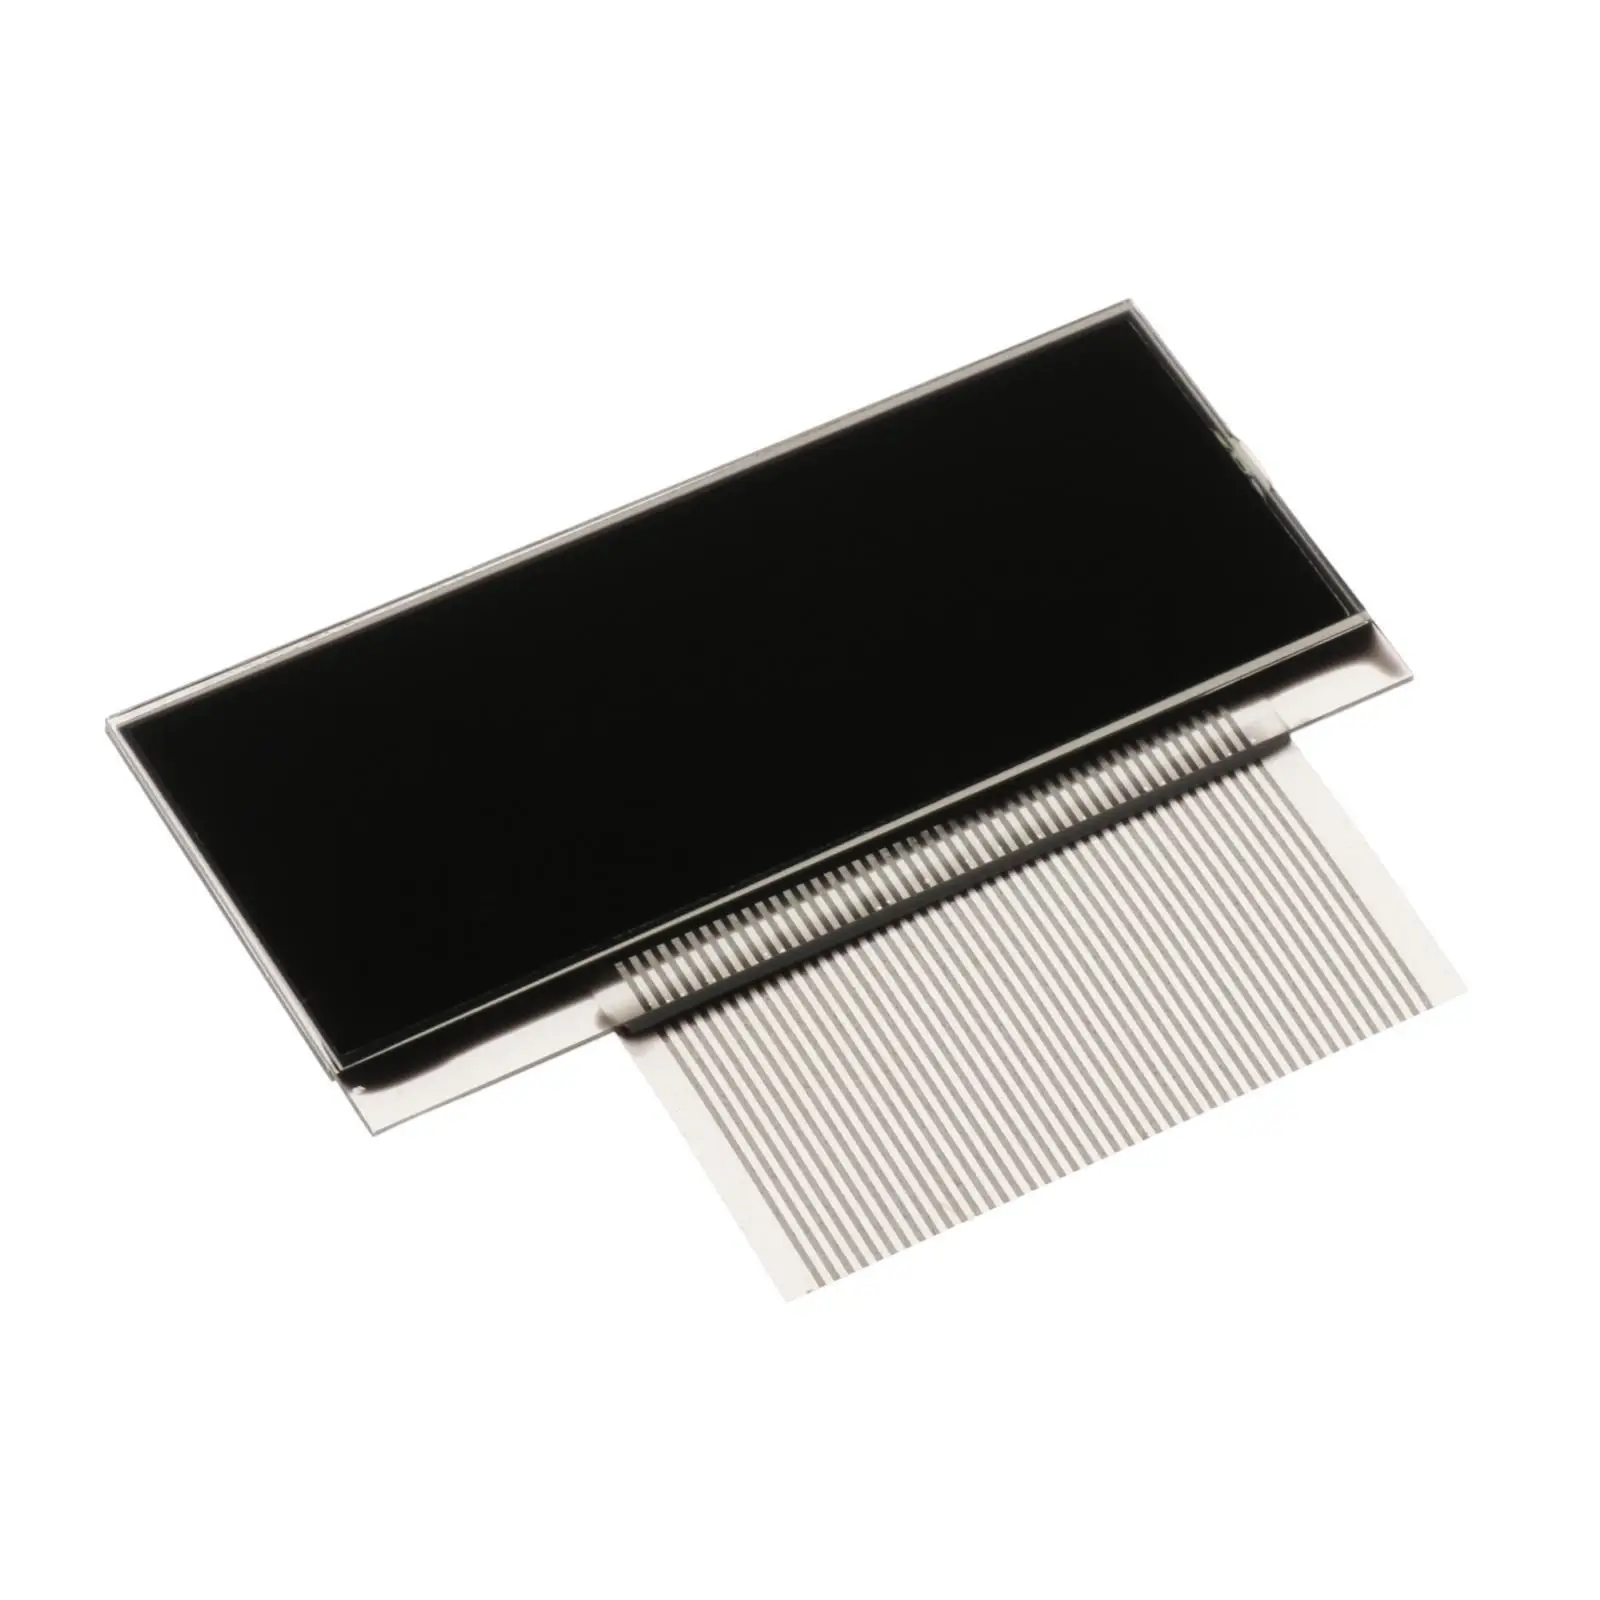   LCD Display Screen Replacement suitable for E34, Professional Accessories